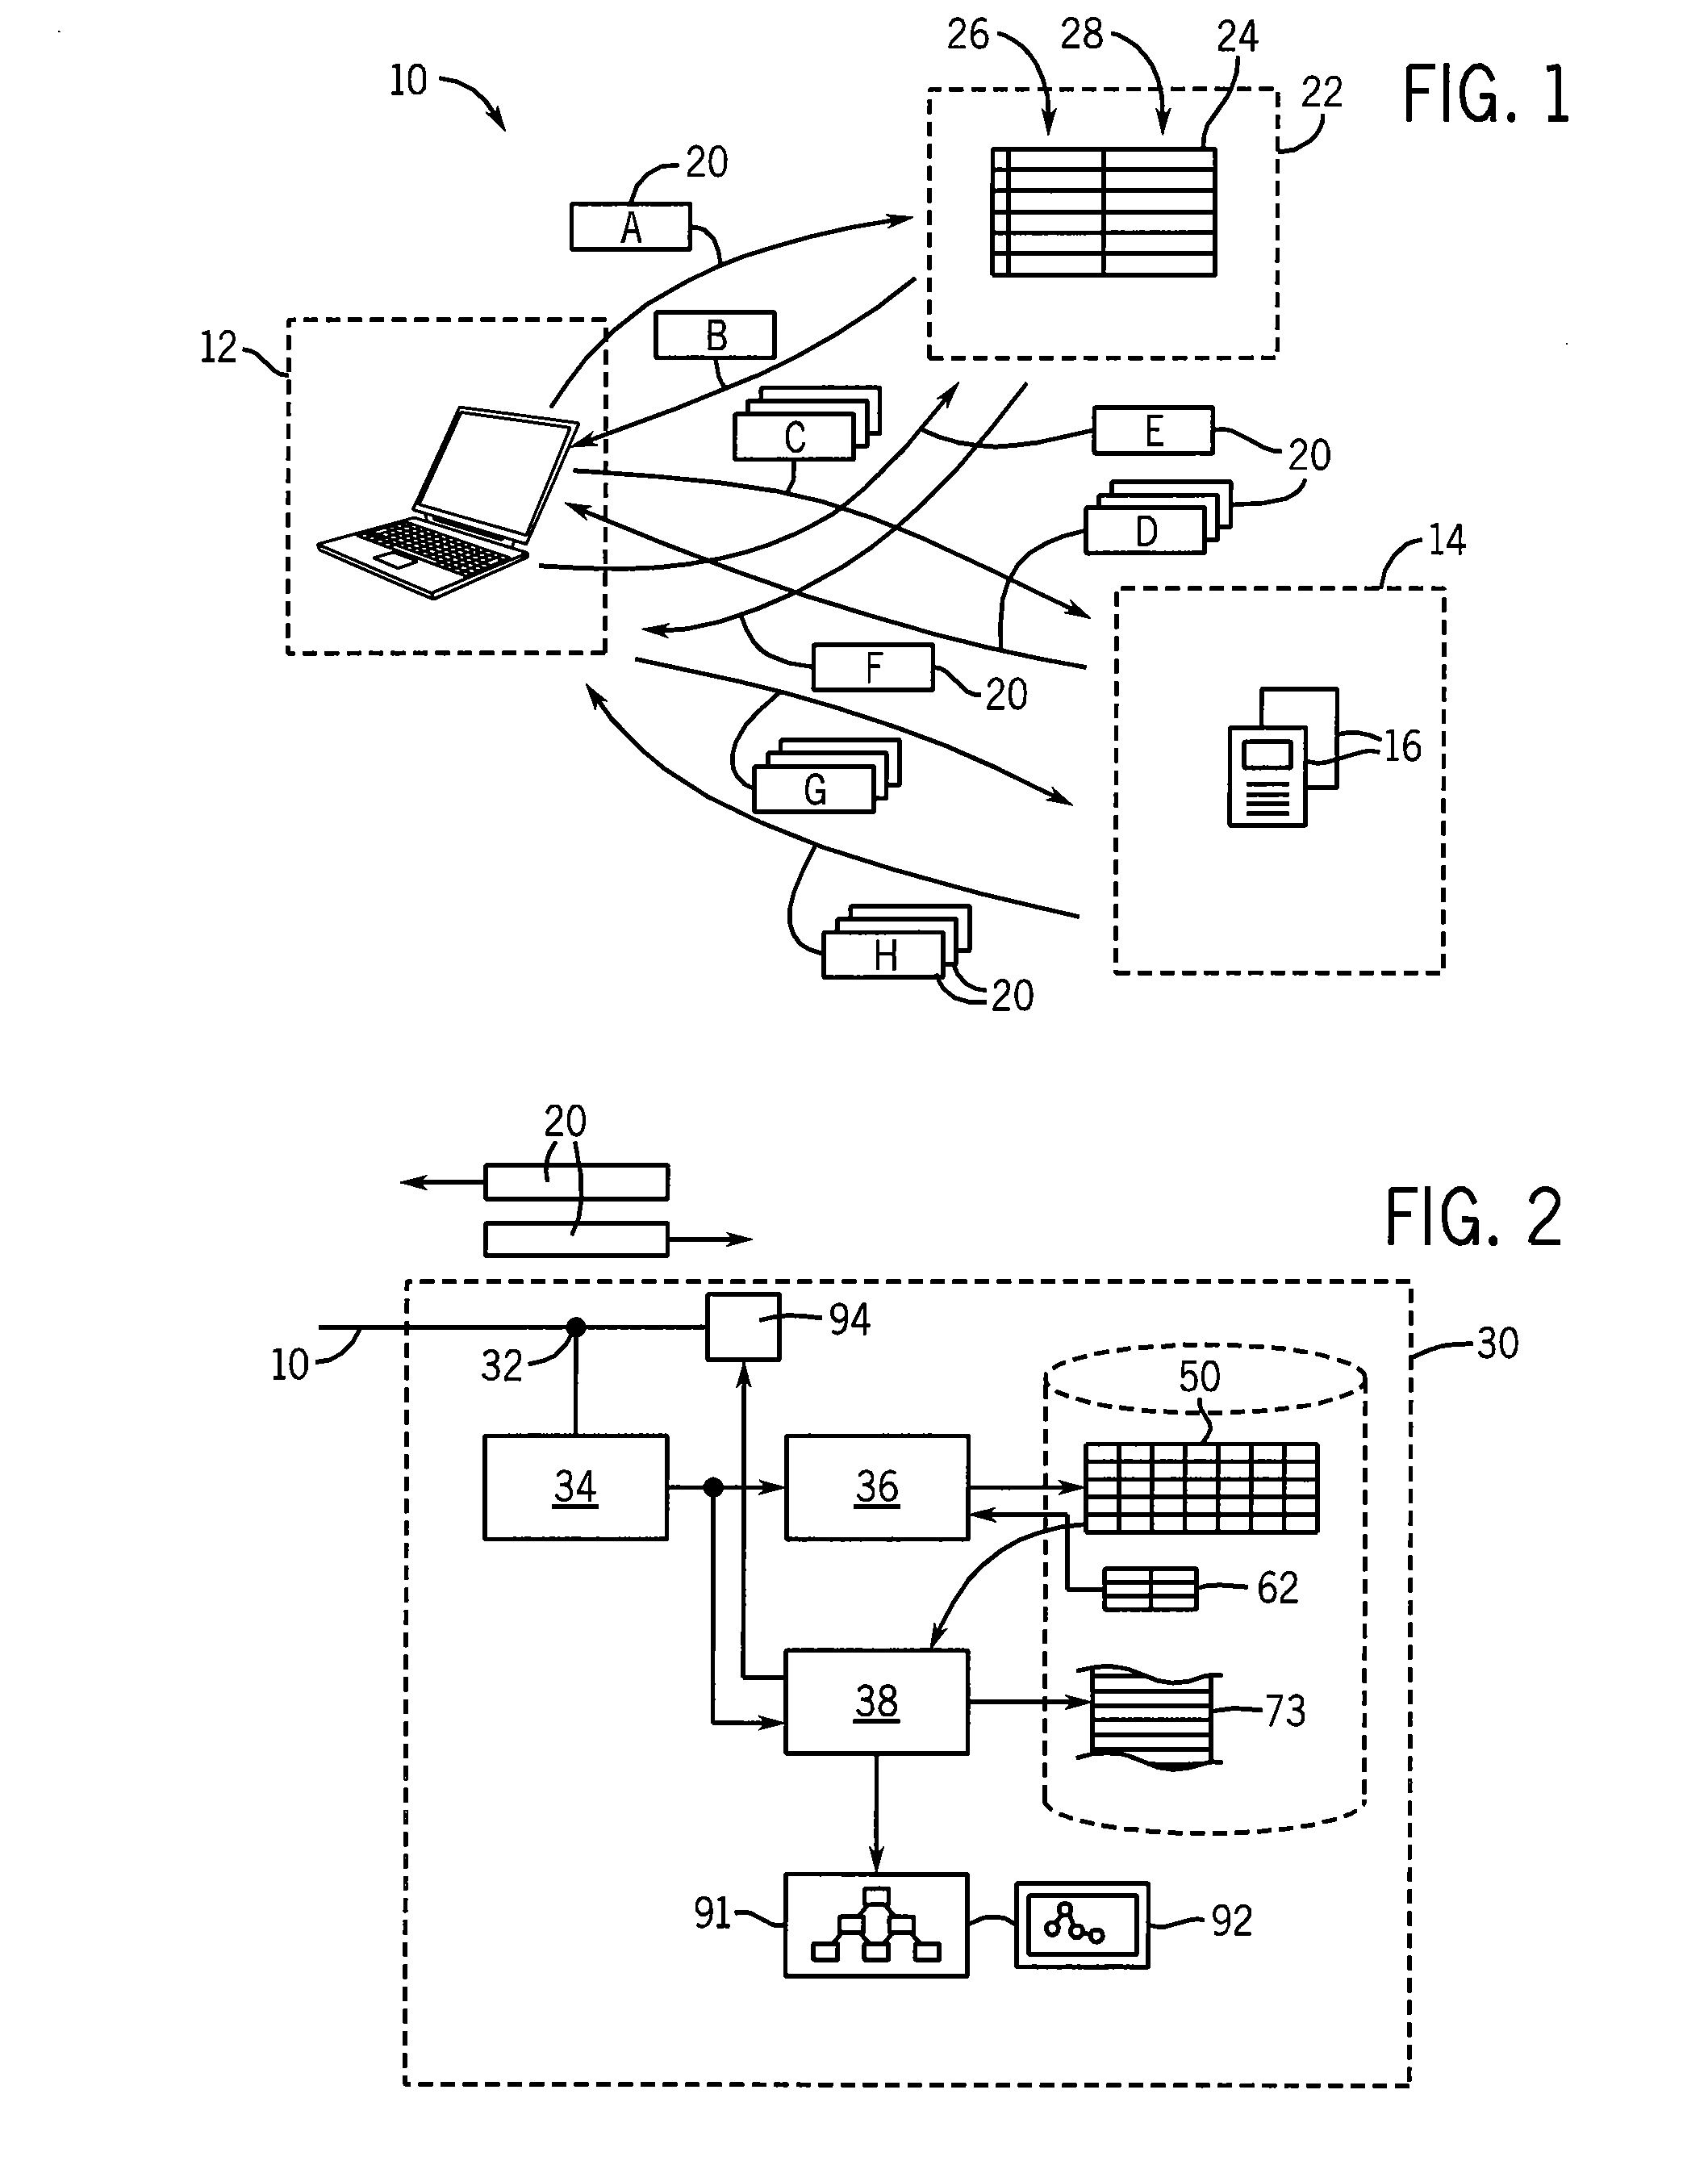 Apparatus and method for classifying network packet data